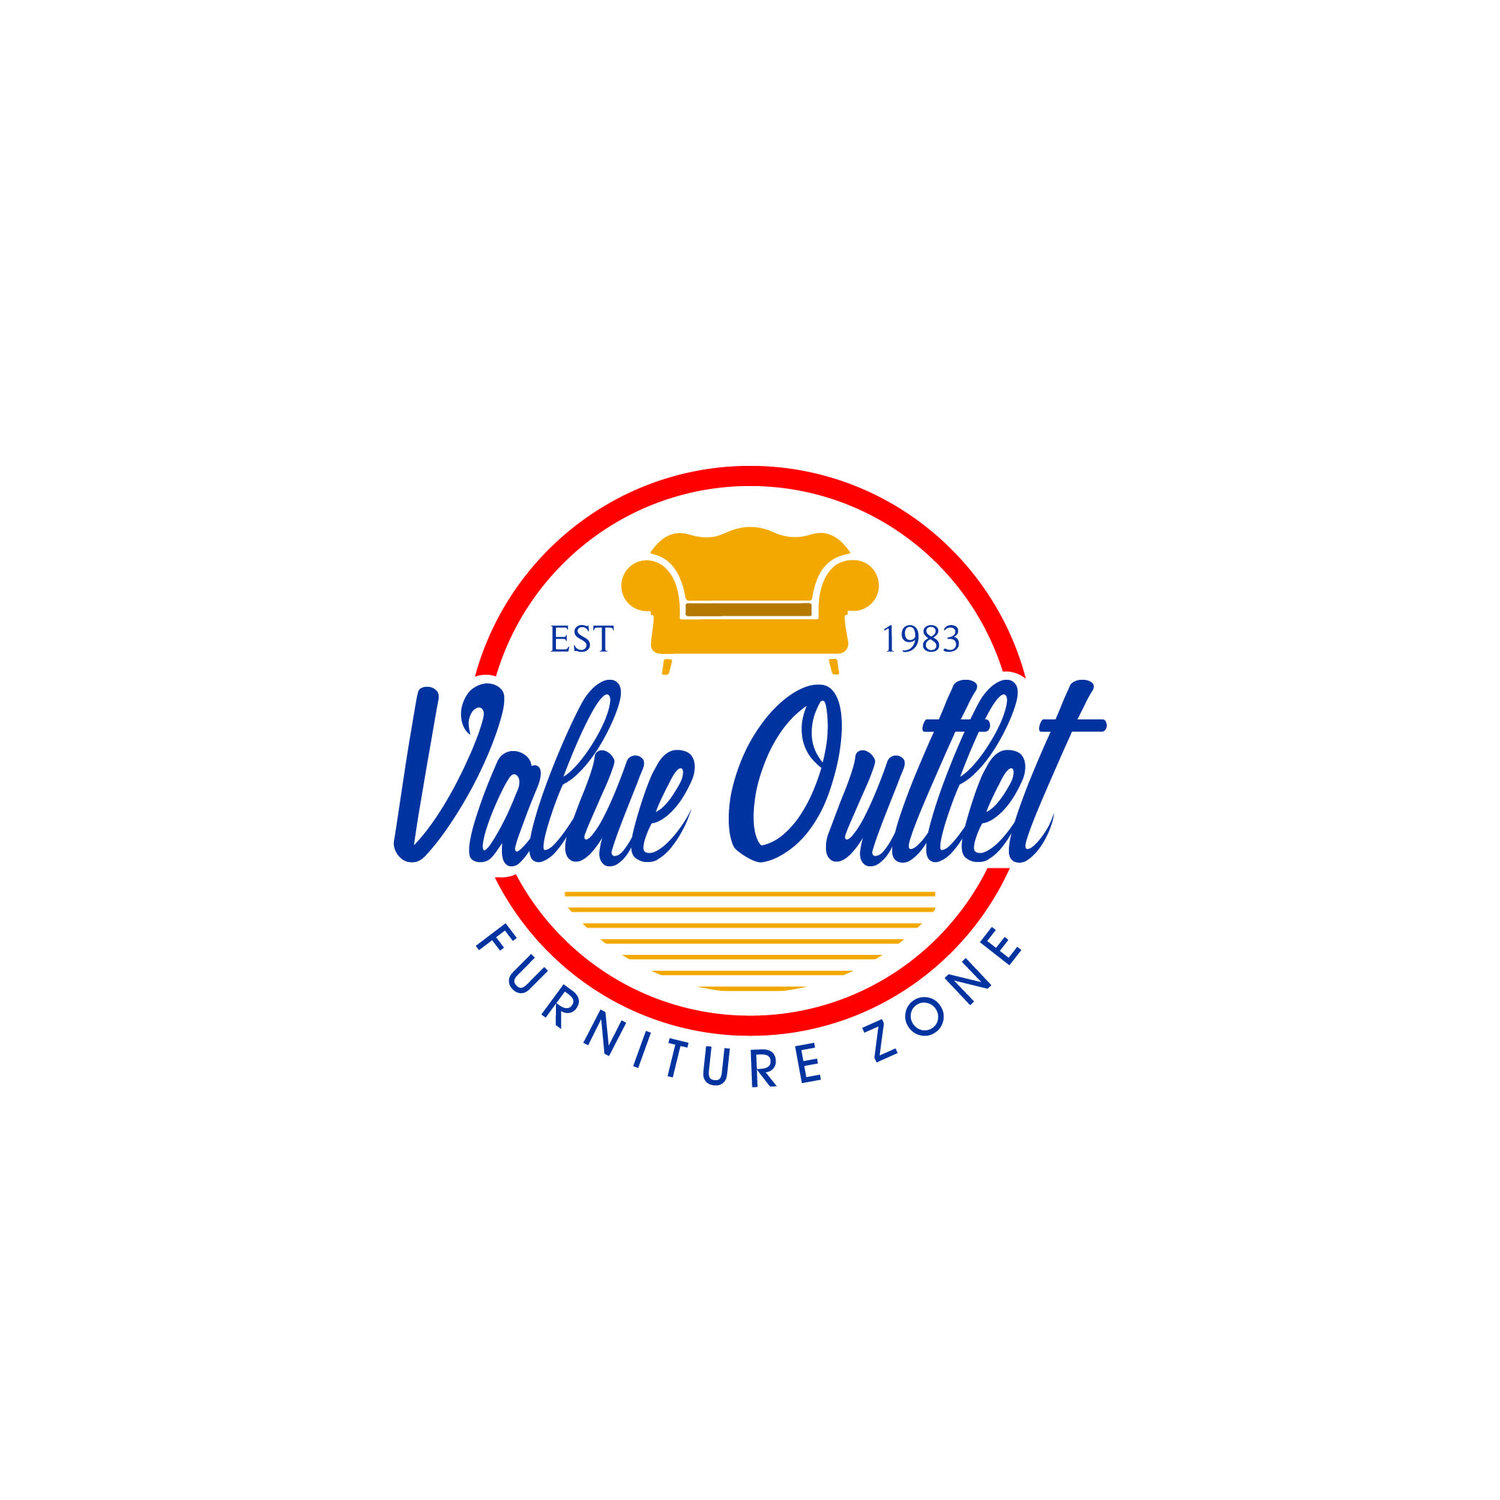 Value Outlet Furniture Zone 